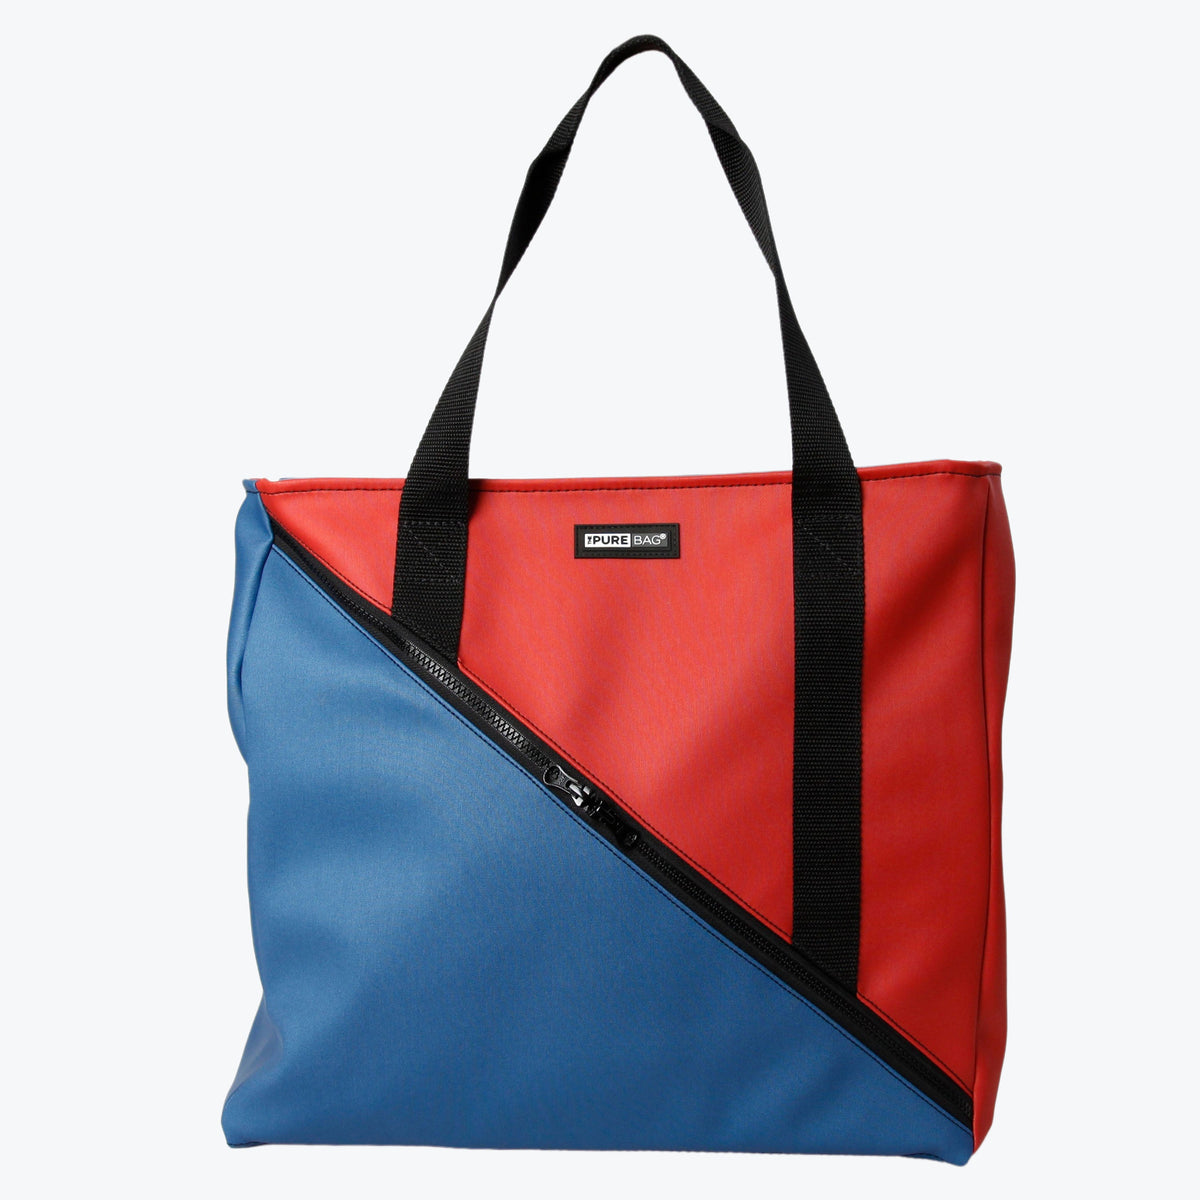 bennett bag in red and blue